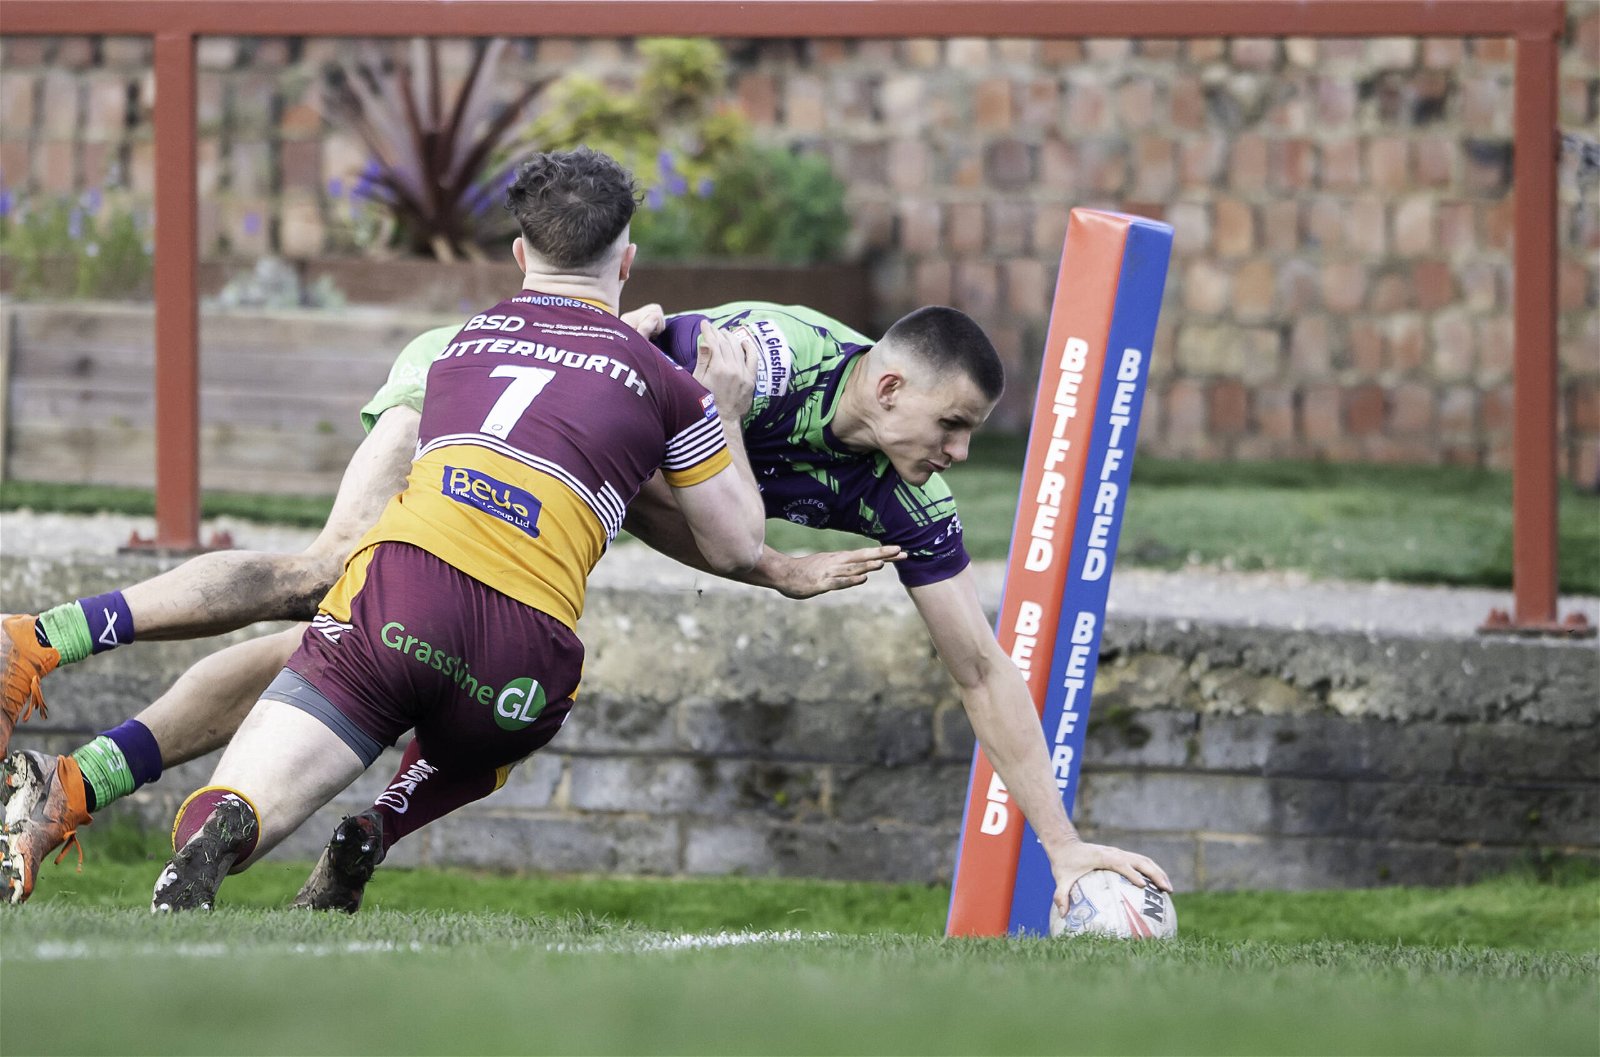 Batley's Robbie Butterworth can't prevent Castleford Tigers winger Innes Senior from scoring a try in the Challenge Cup.